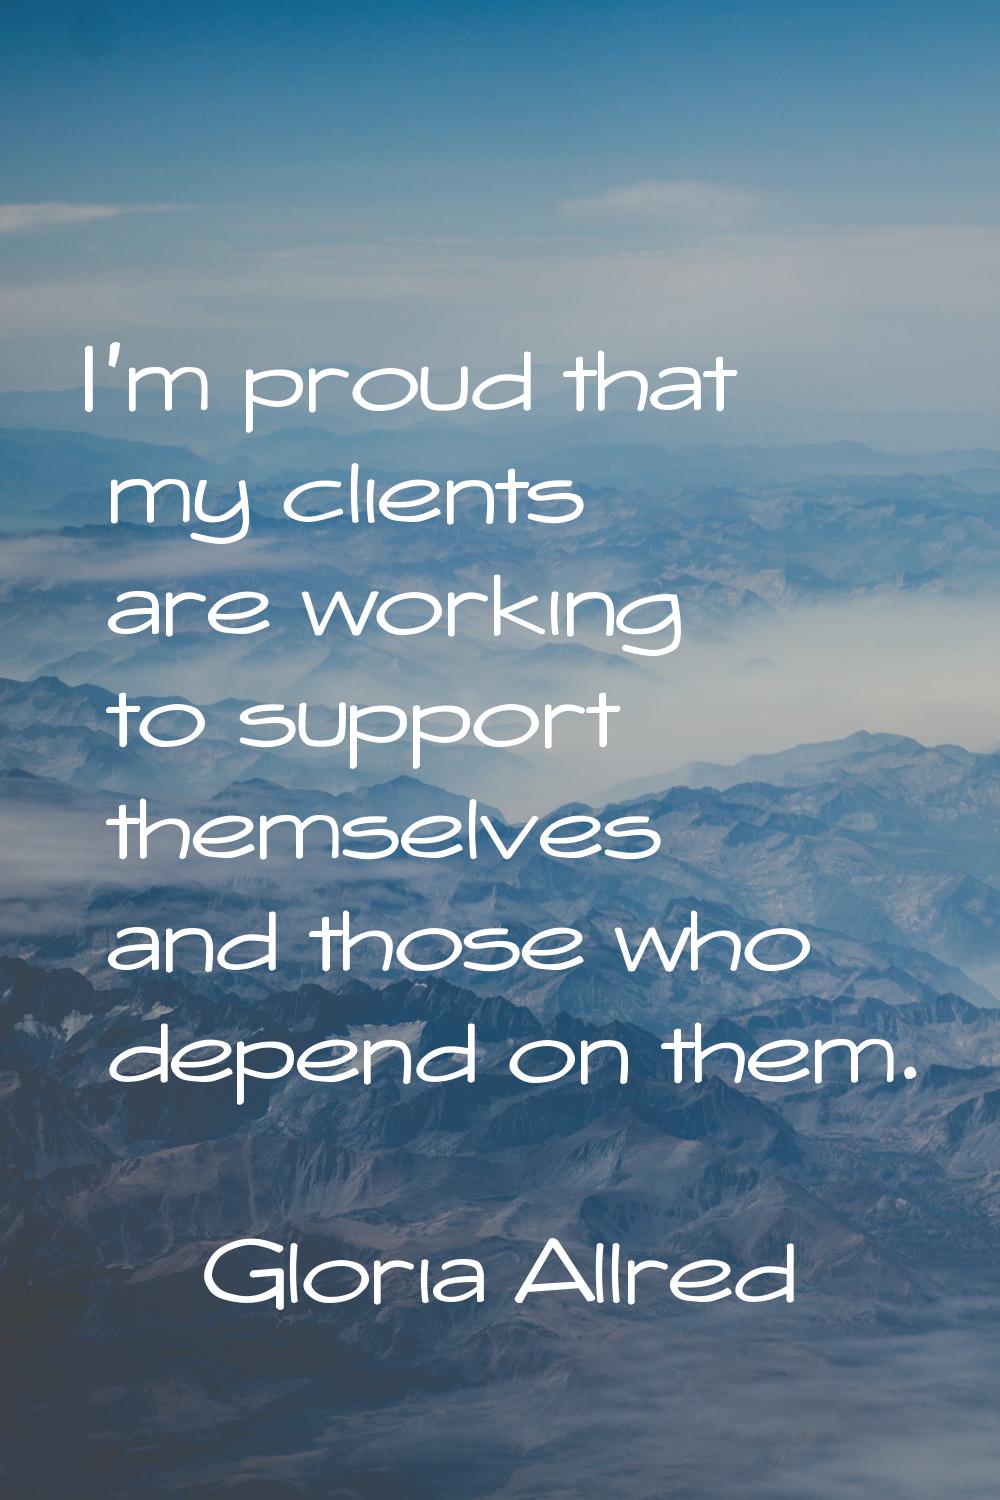 I'm proud that my clients are working to support themselves and those who depend on them.